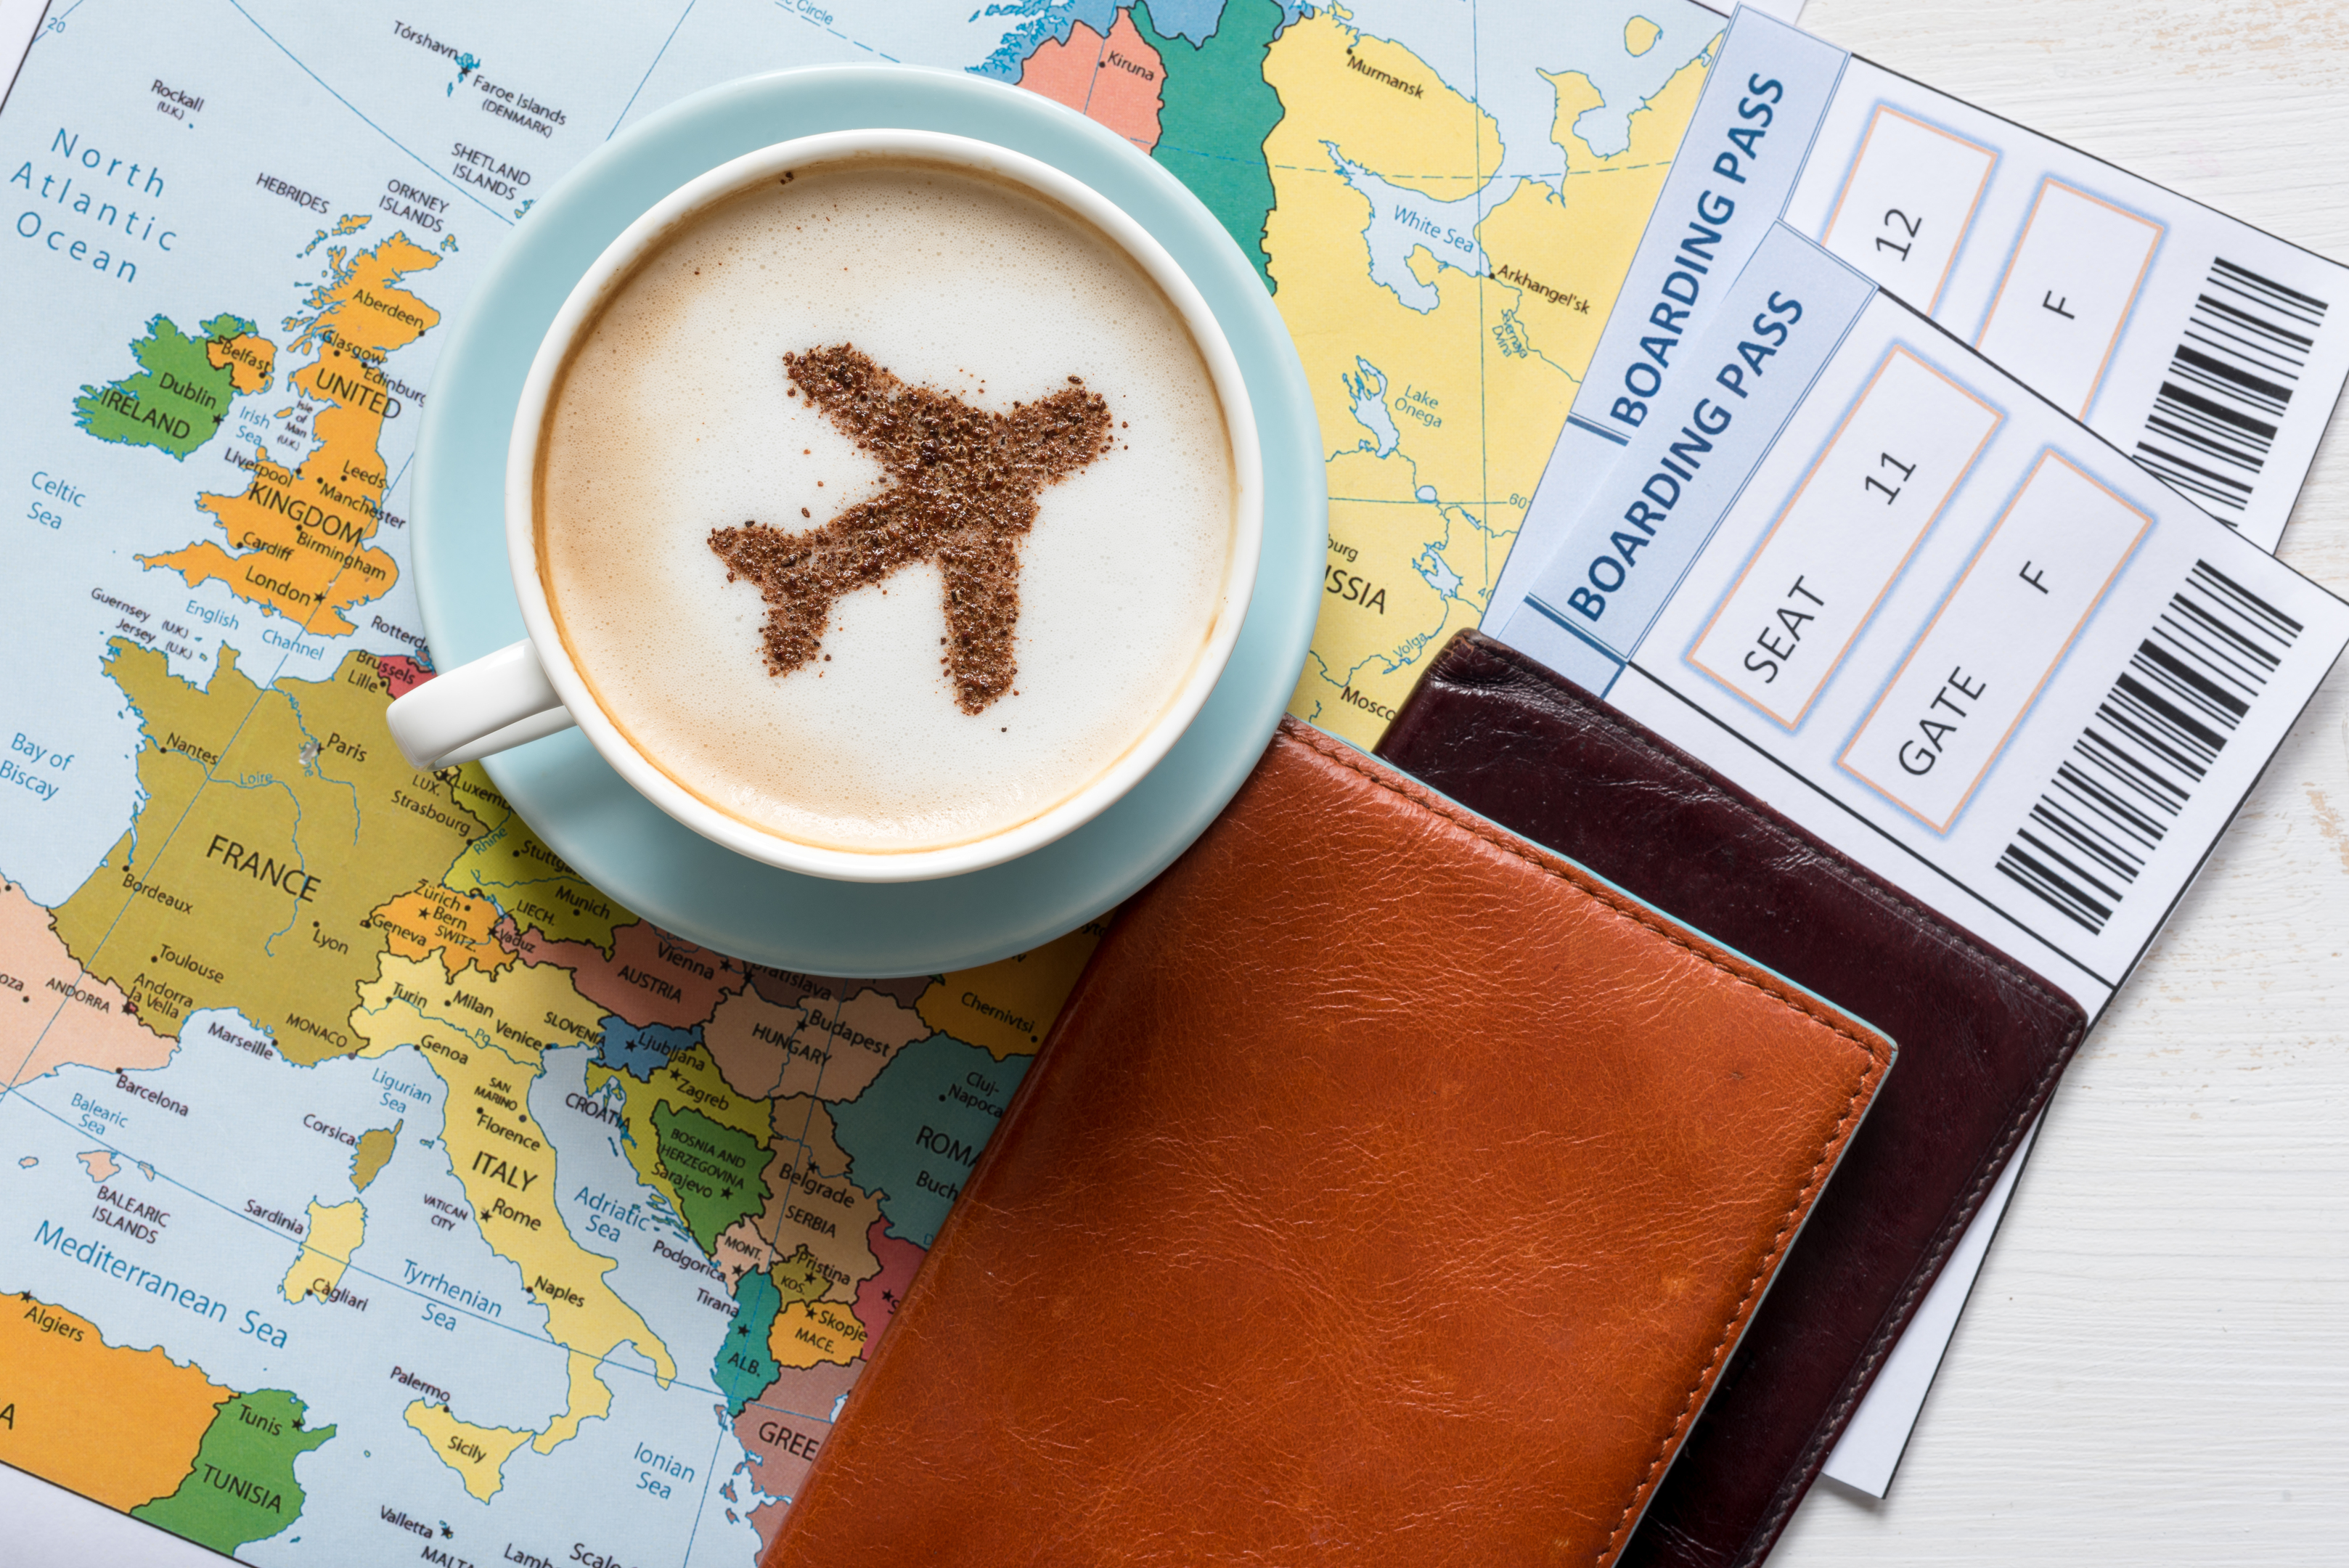 More than 1.5 million airport check-ins or holiday posts were made about trips in June (iStock)